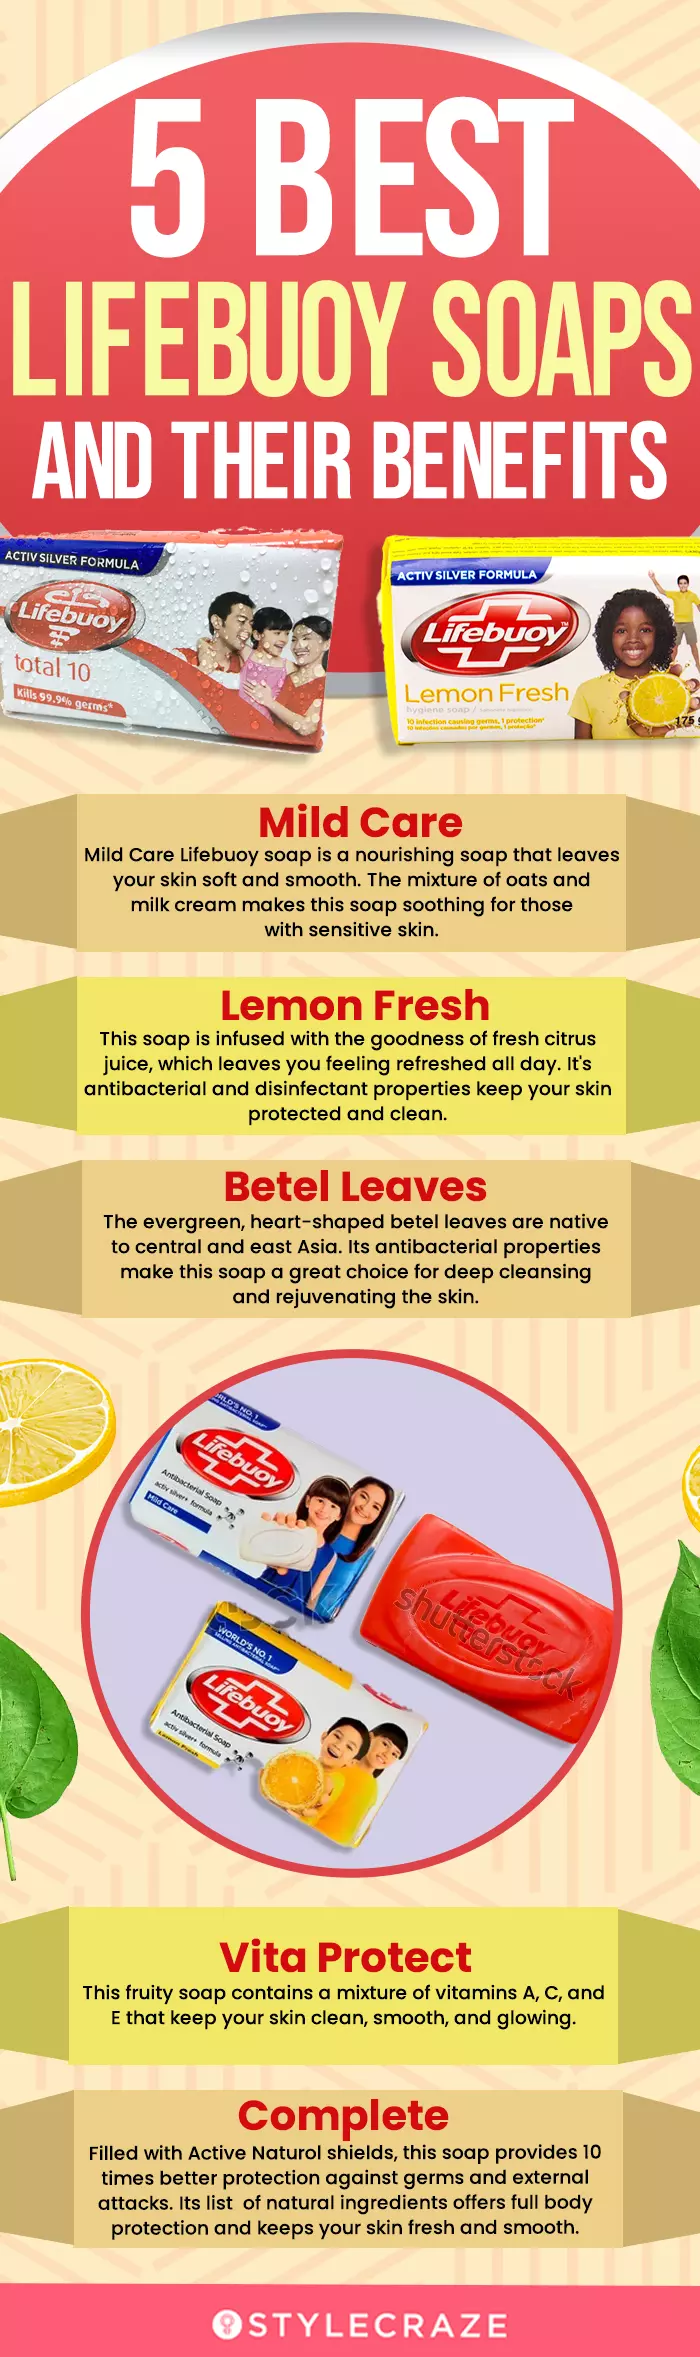 5 best lifebuoy soaps and their benefits (infographic)